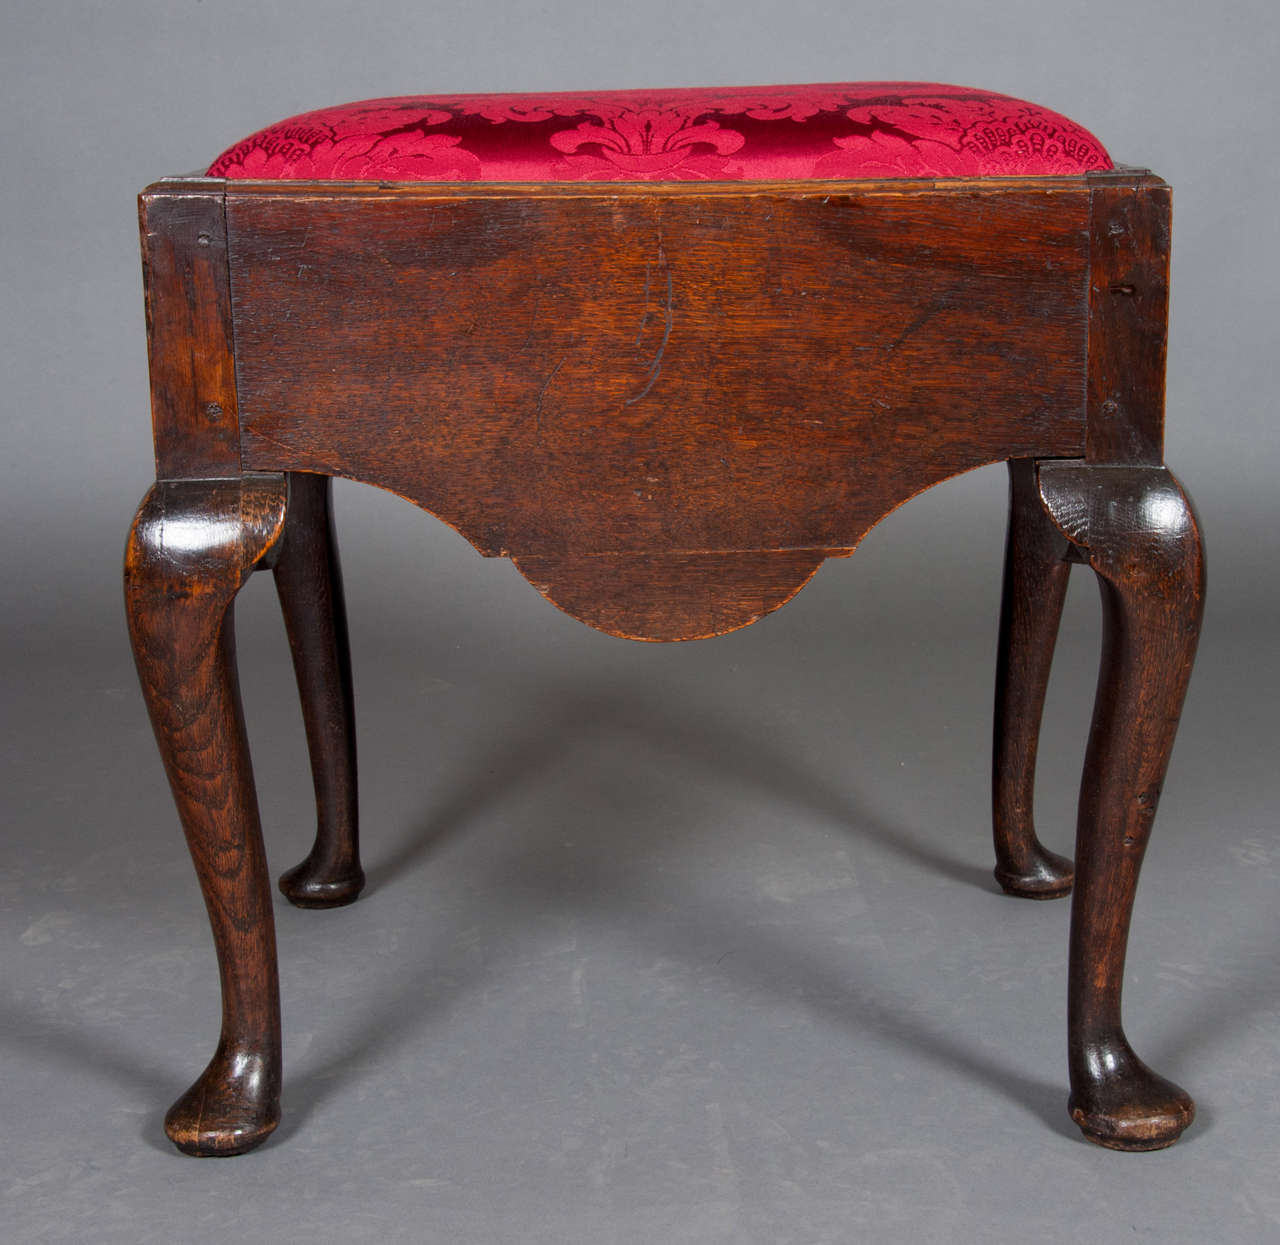 George II Mid-18th Century Oak Dressing Stool with red damask covered drop-in seat